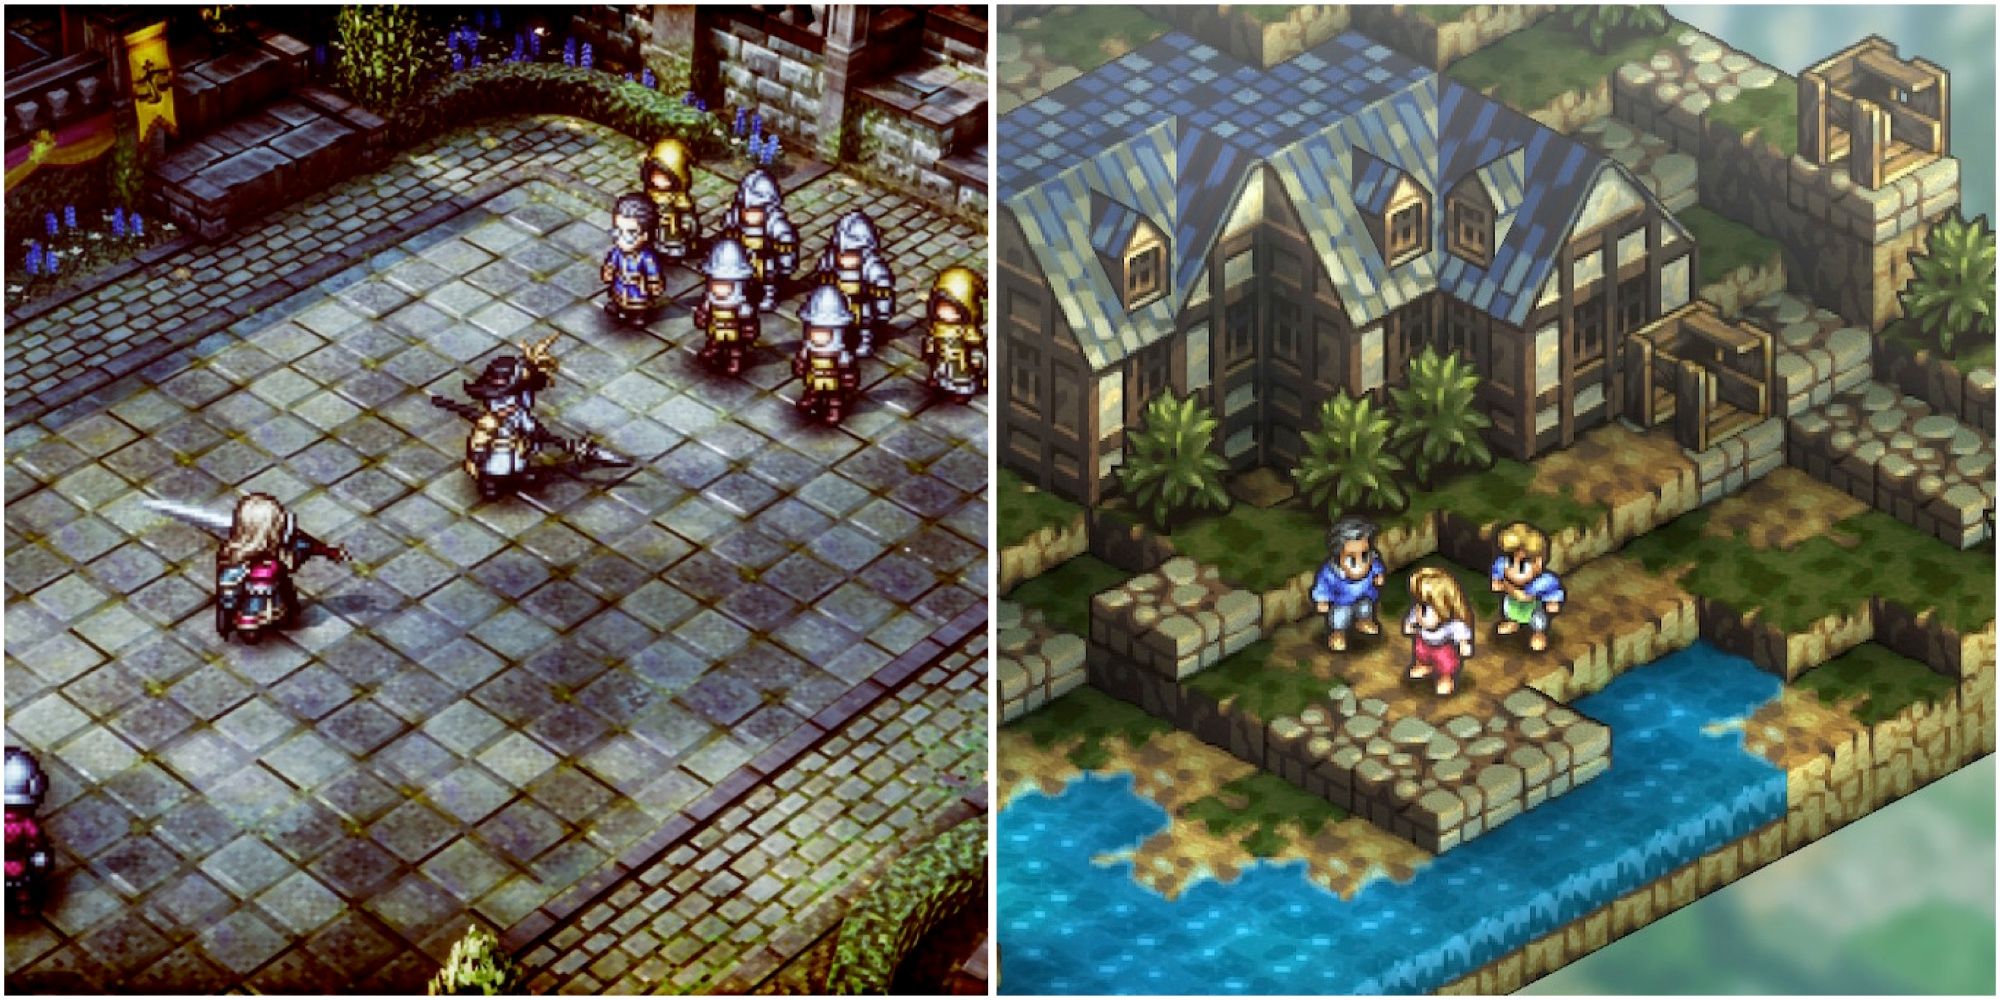 Cutscenes featuring characters in Triangle Strategy and Tactics Ogre Reborn